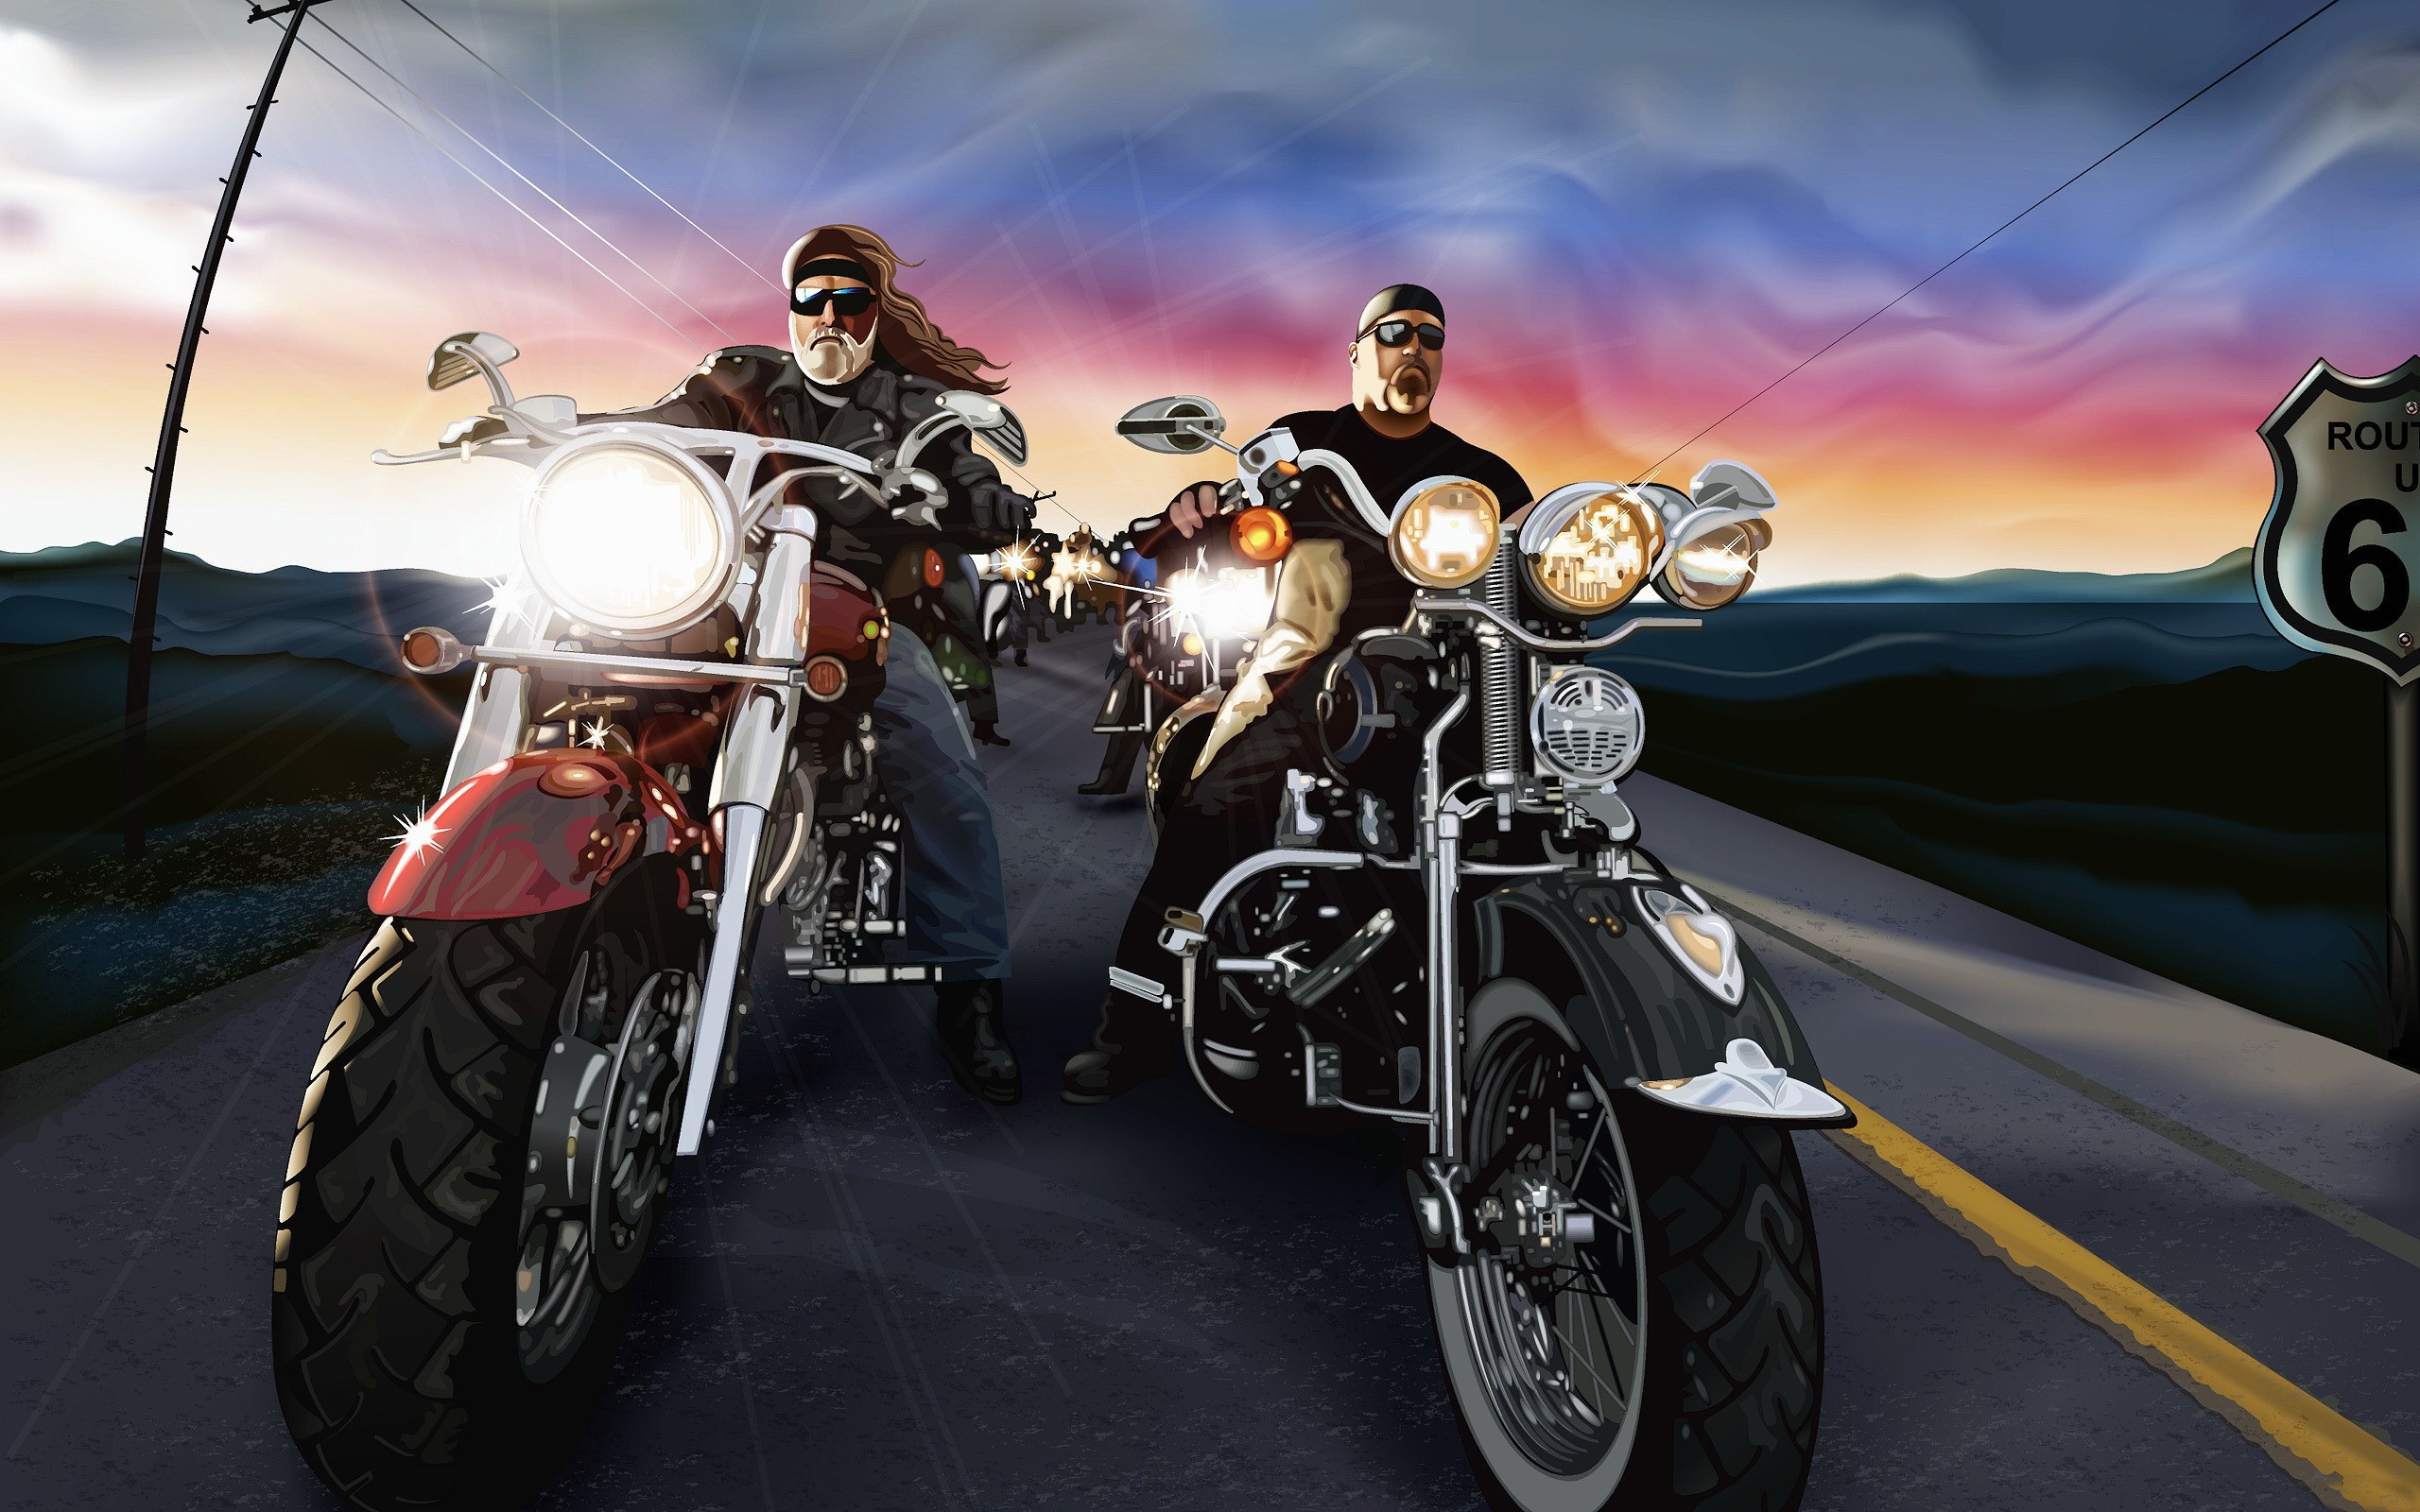 Choppers On Route 66 Wallpaper 2560x1600